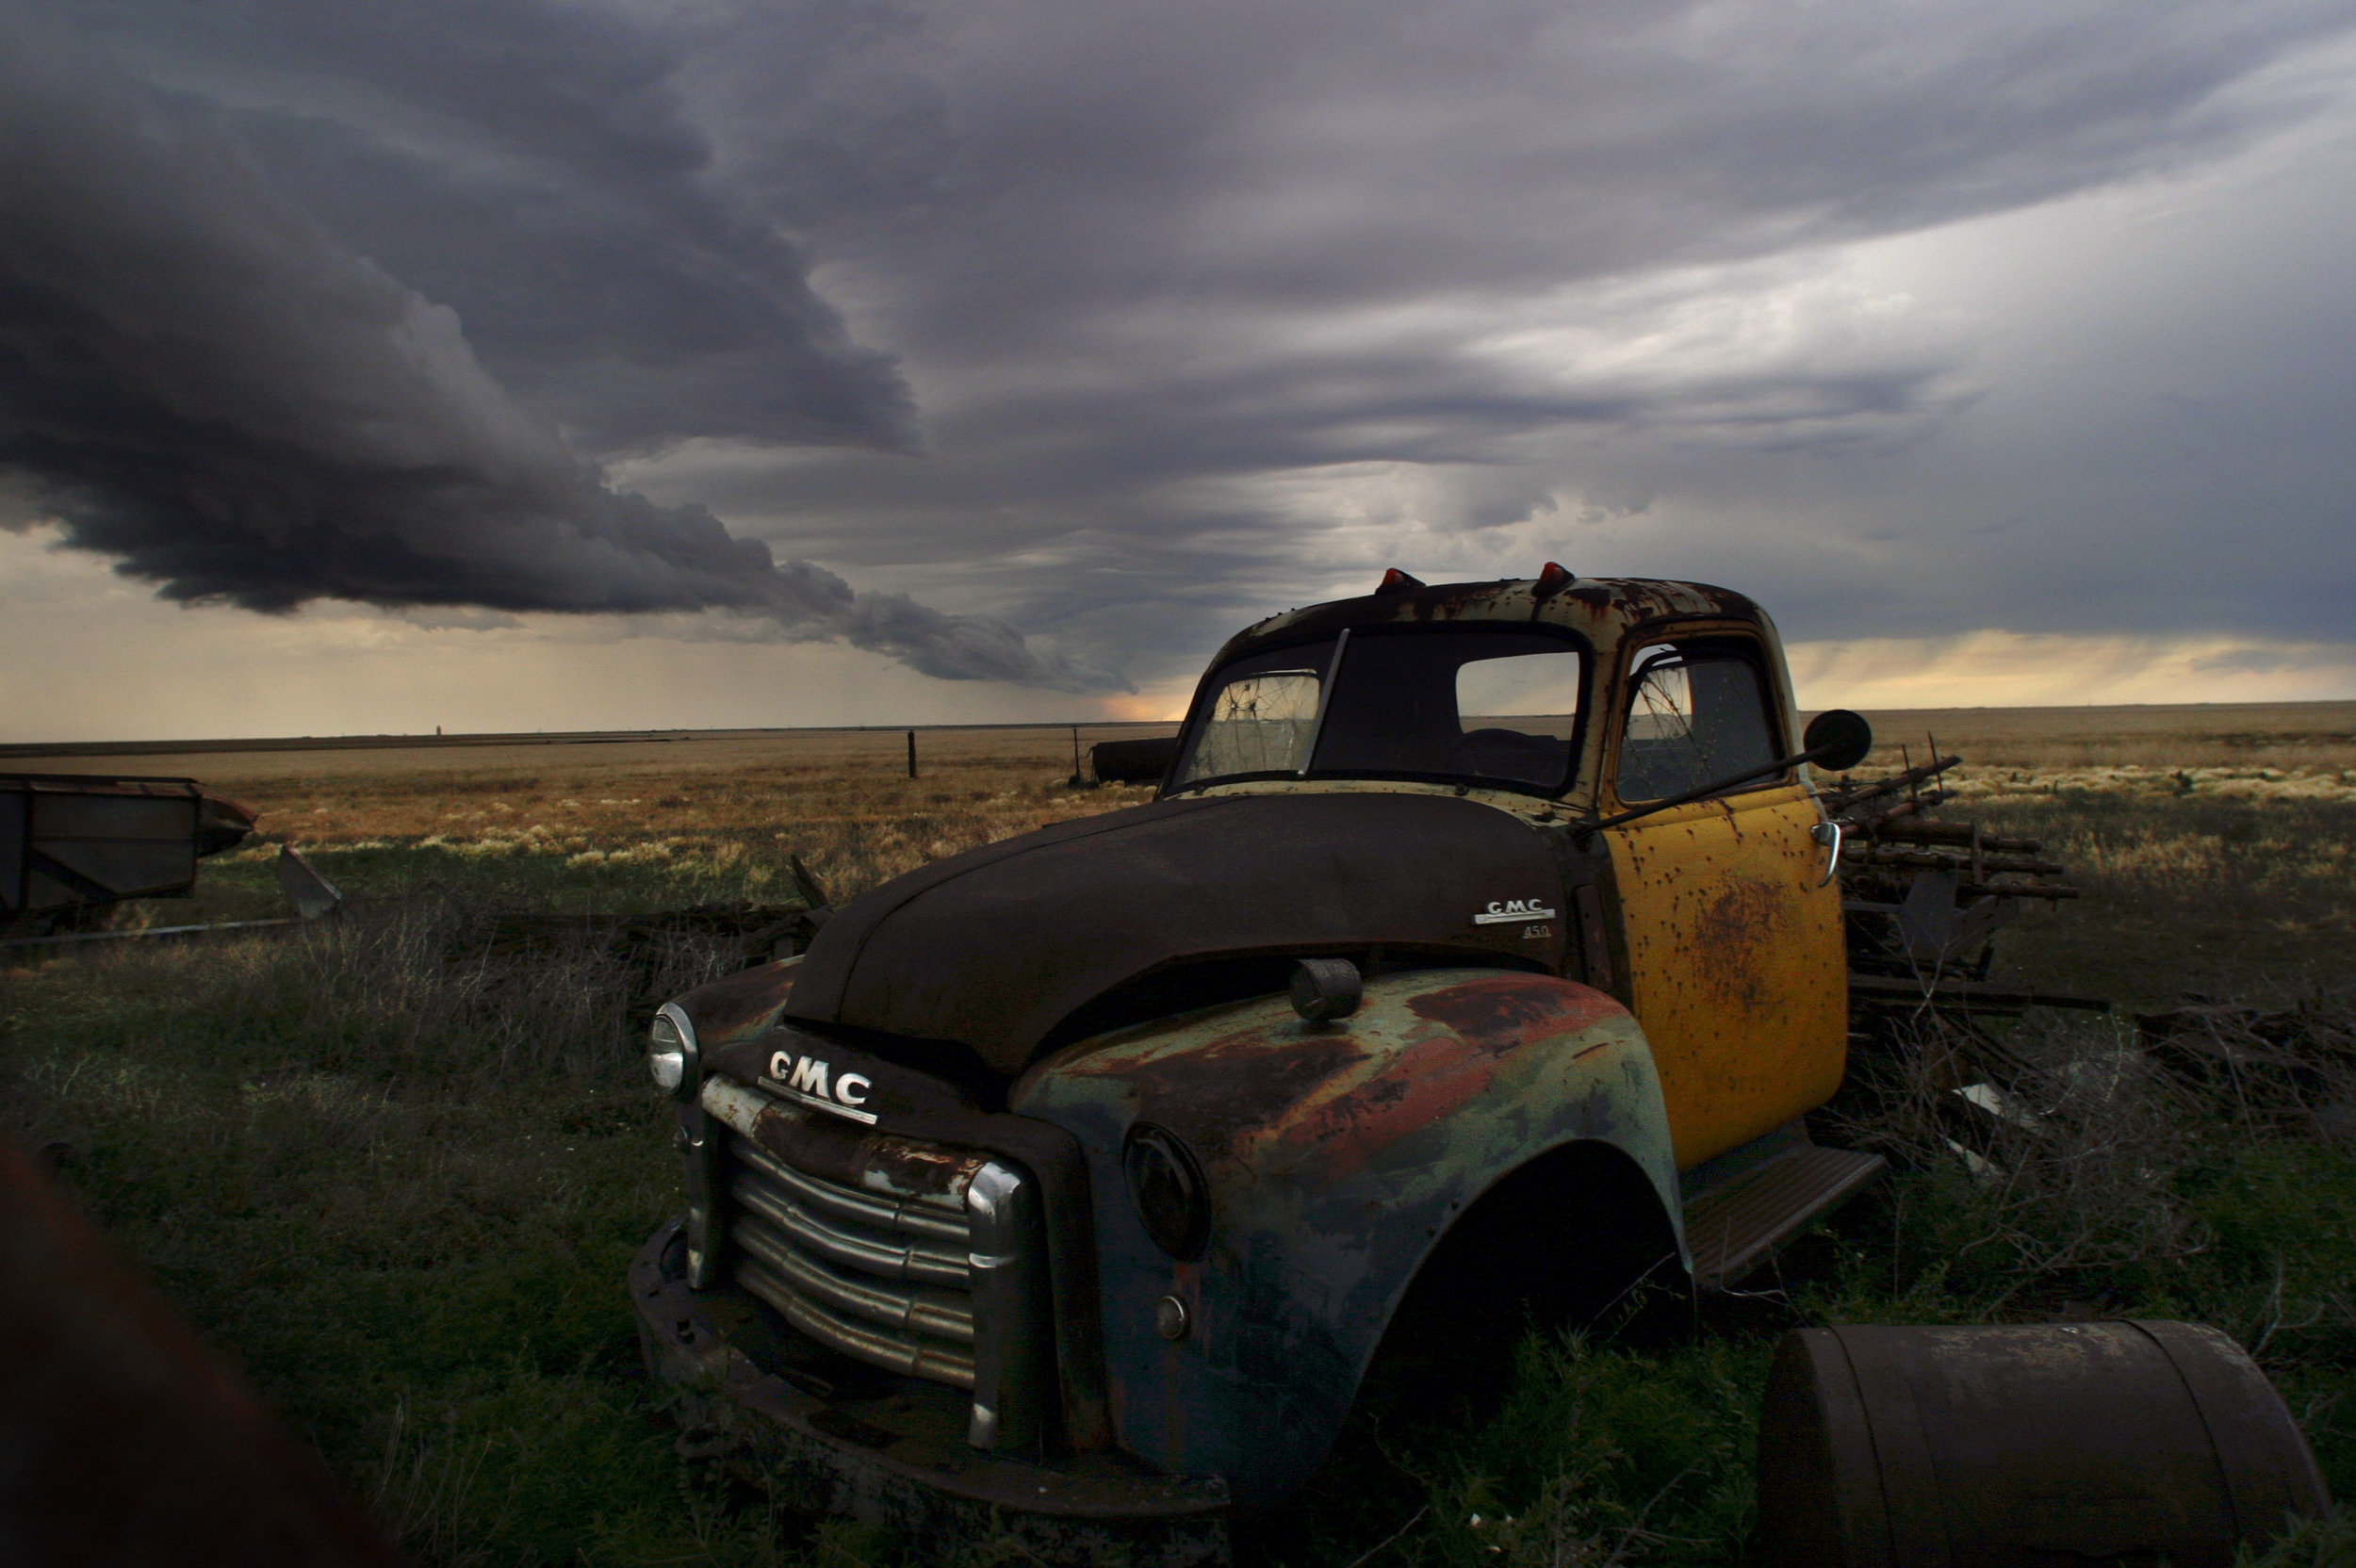   A look at America along iconic Route 66, winding from Chicago to Los Angeles.   A Texas storm blows across the prairie near an abandoned old GMC car east of Amarillo, Texas. 